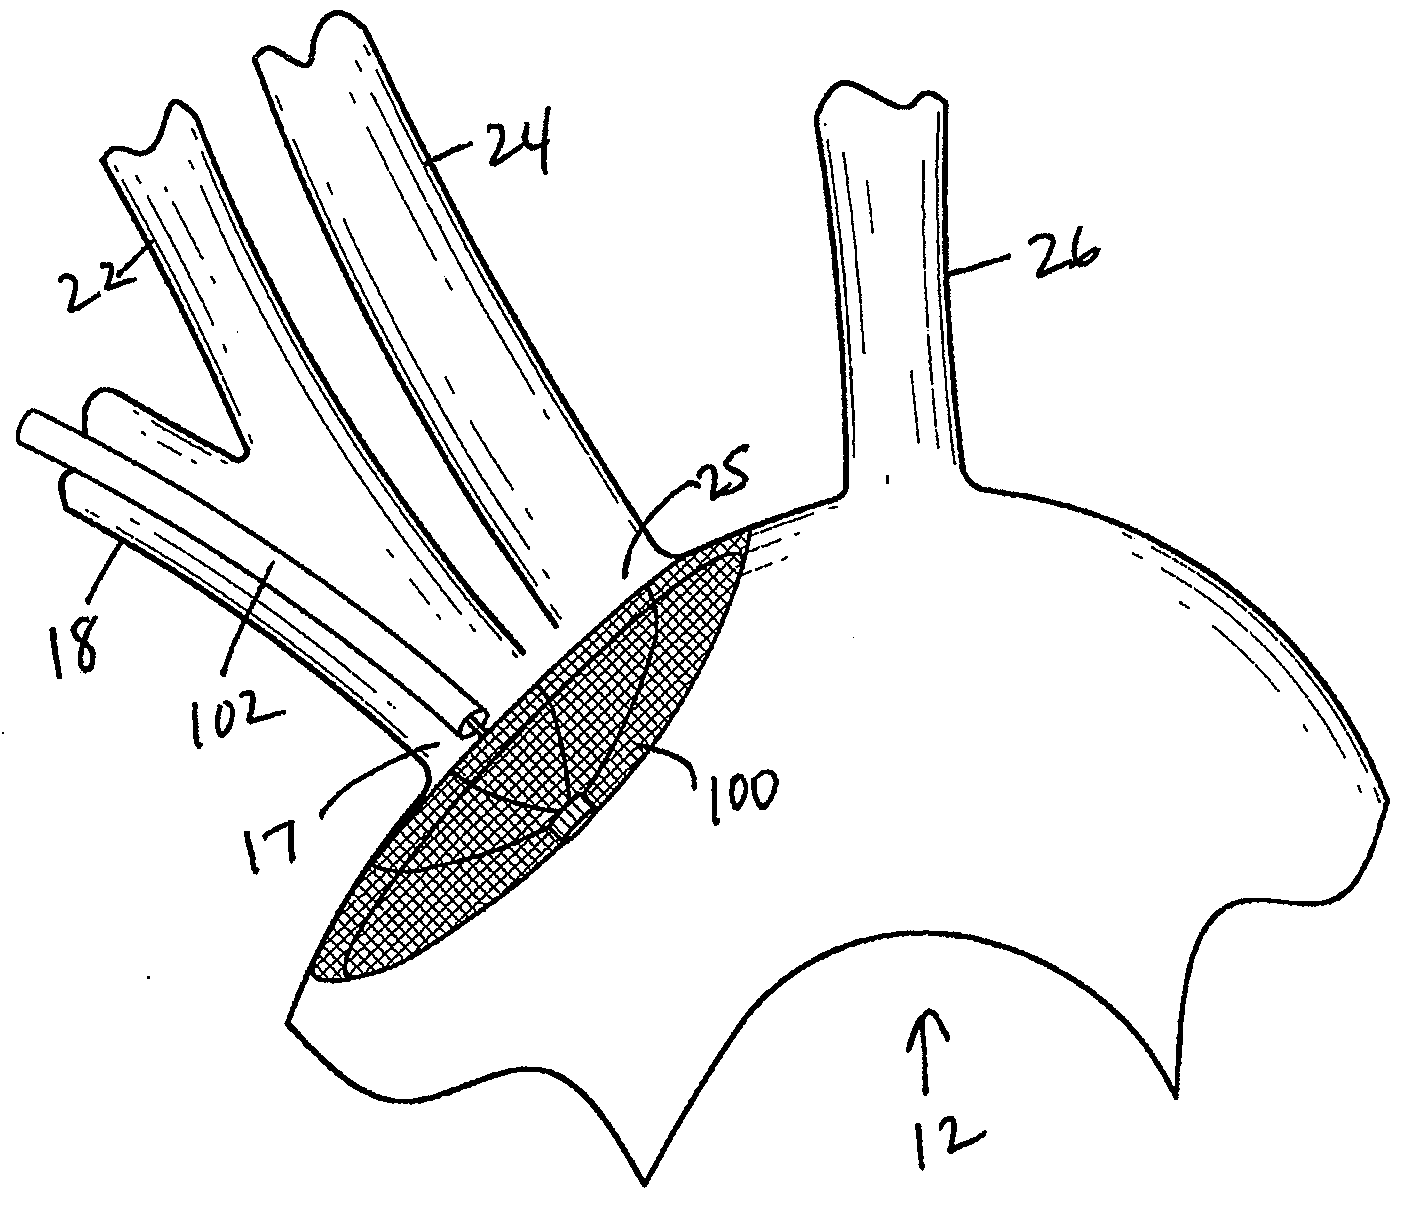 Methods of reducing embolism to cerebral circulation as a consequence of an index cardiac procedure